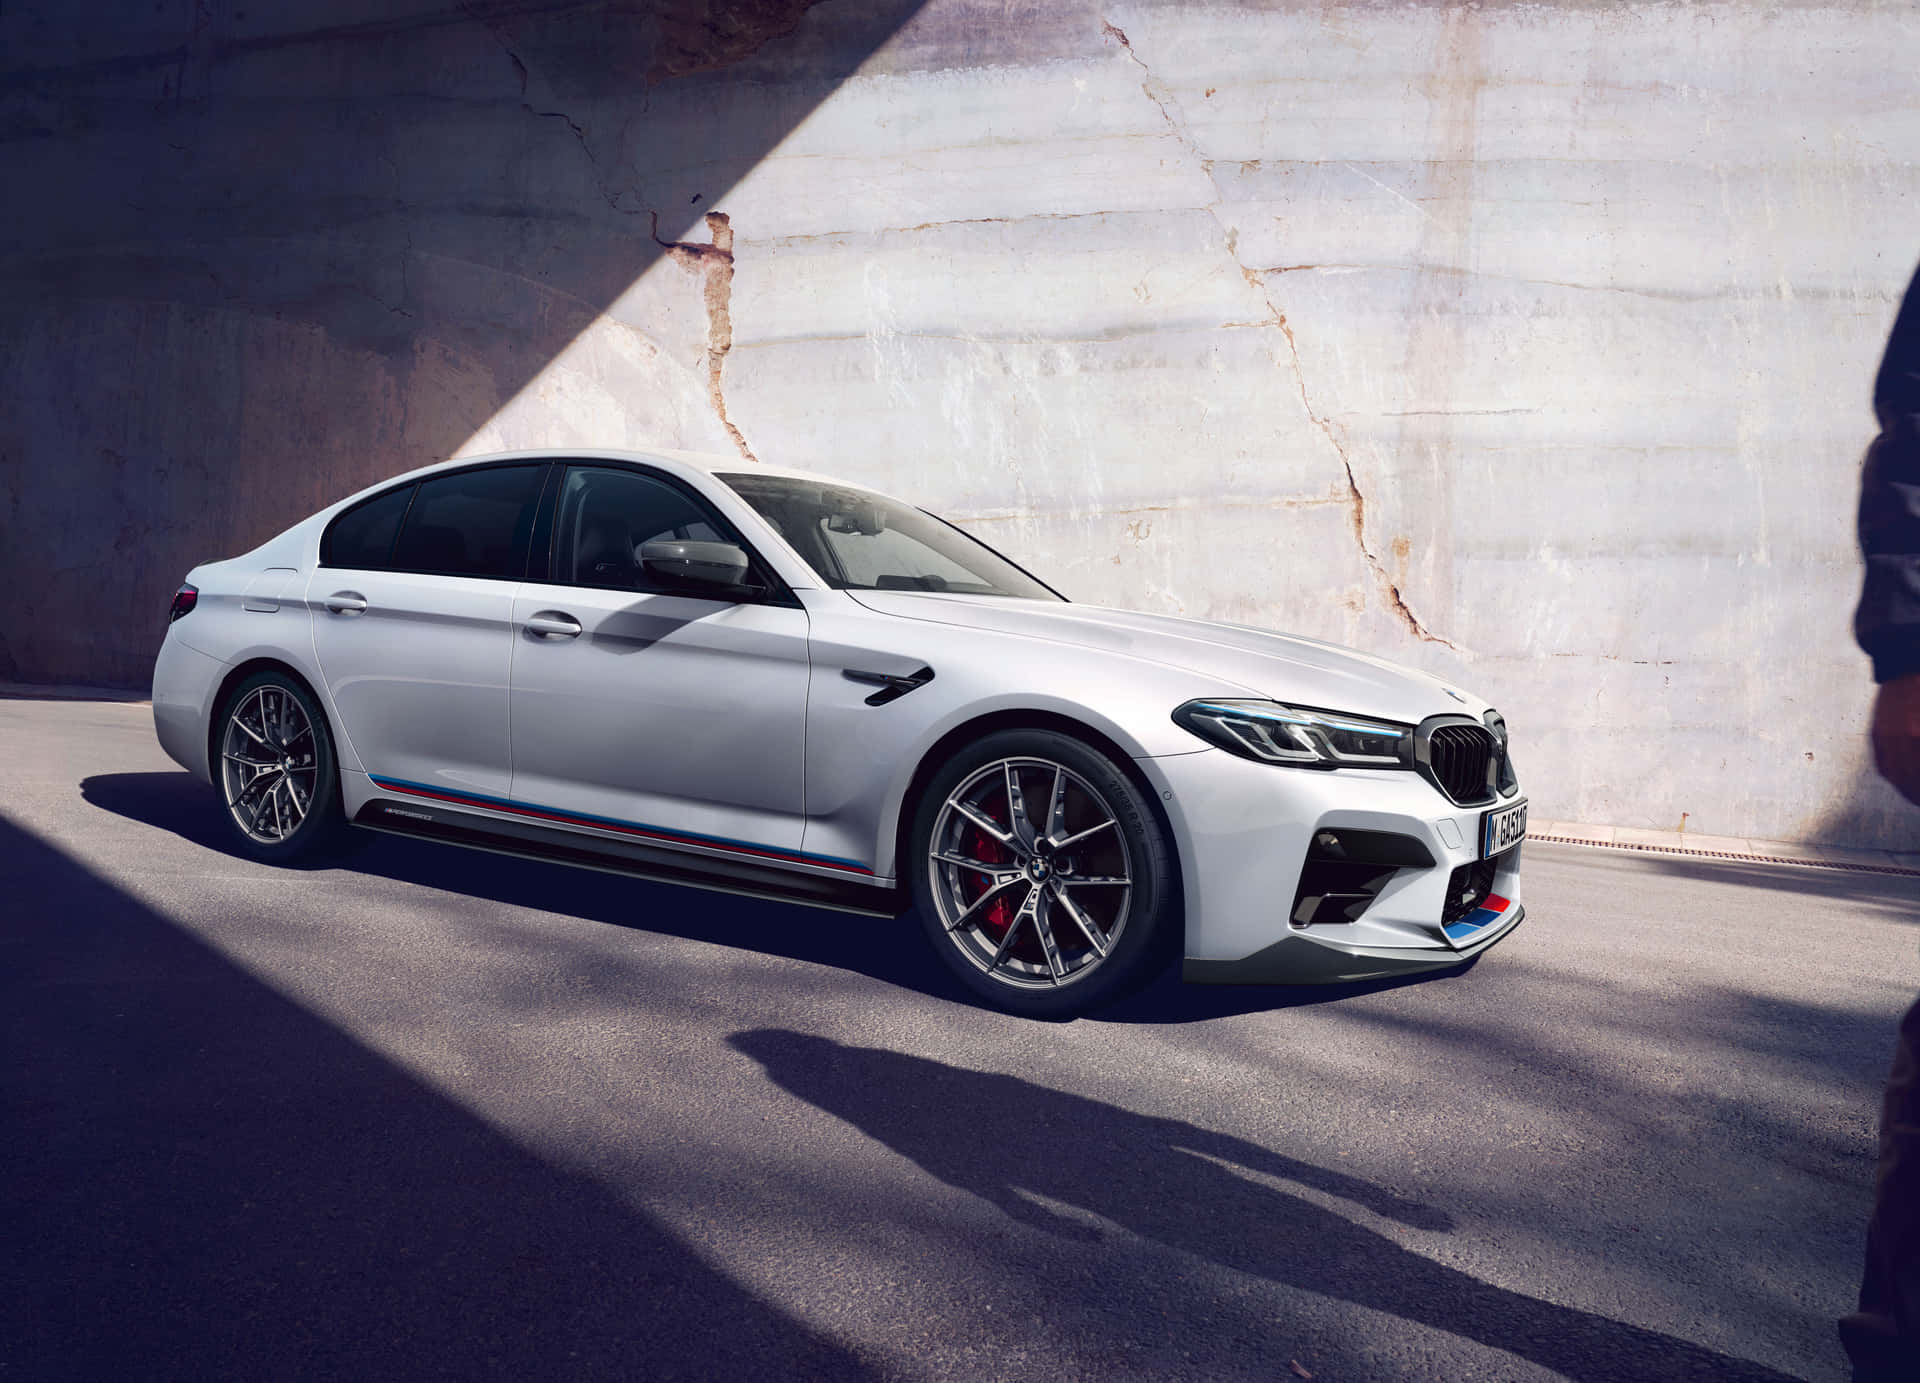 Luxury and power come together in the BMW M5 Wallpaper